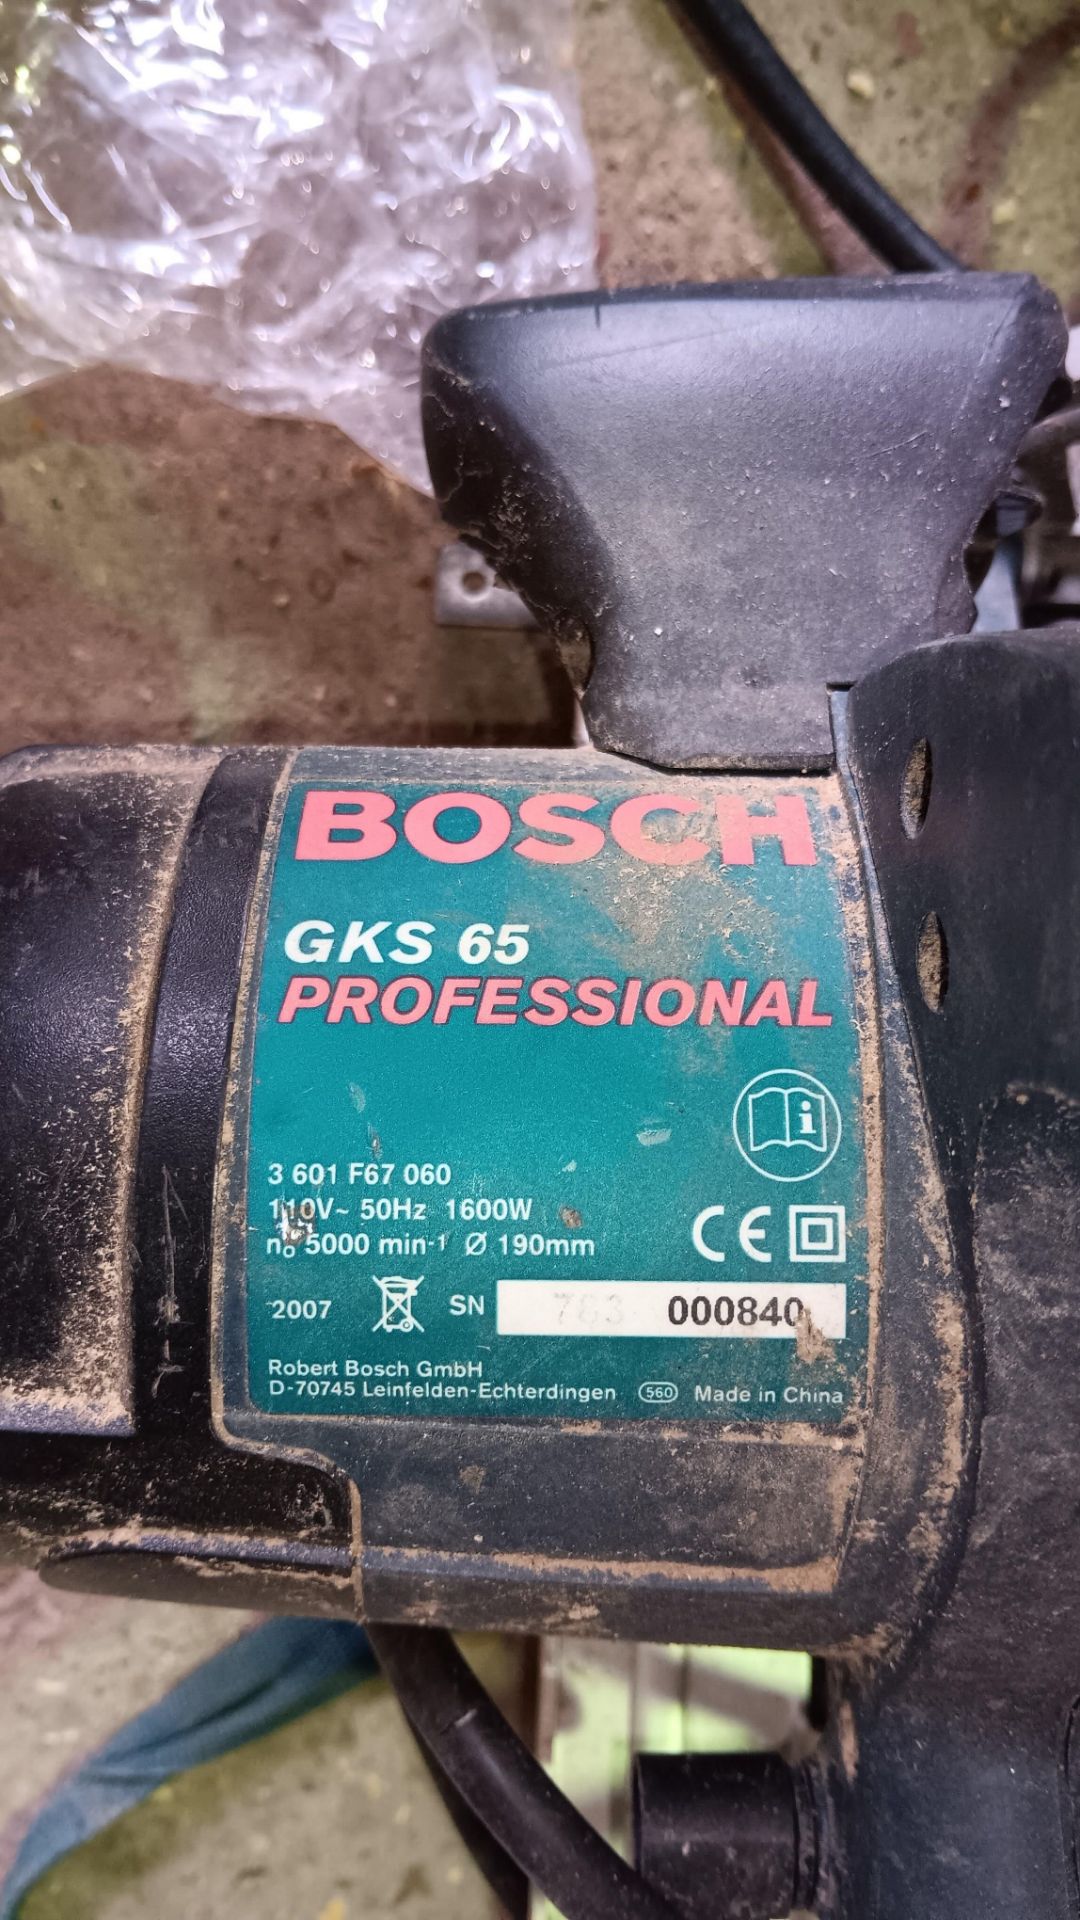 Bosch GKS65 Professional 190mm circular saw with bag, 110v, serial number 763000840 (2007) - Image 3 of 3